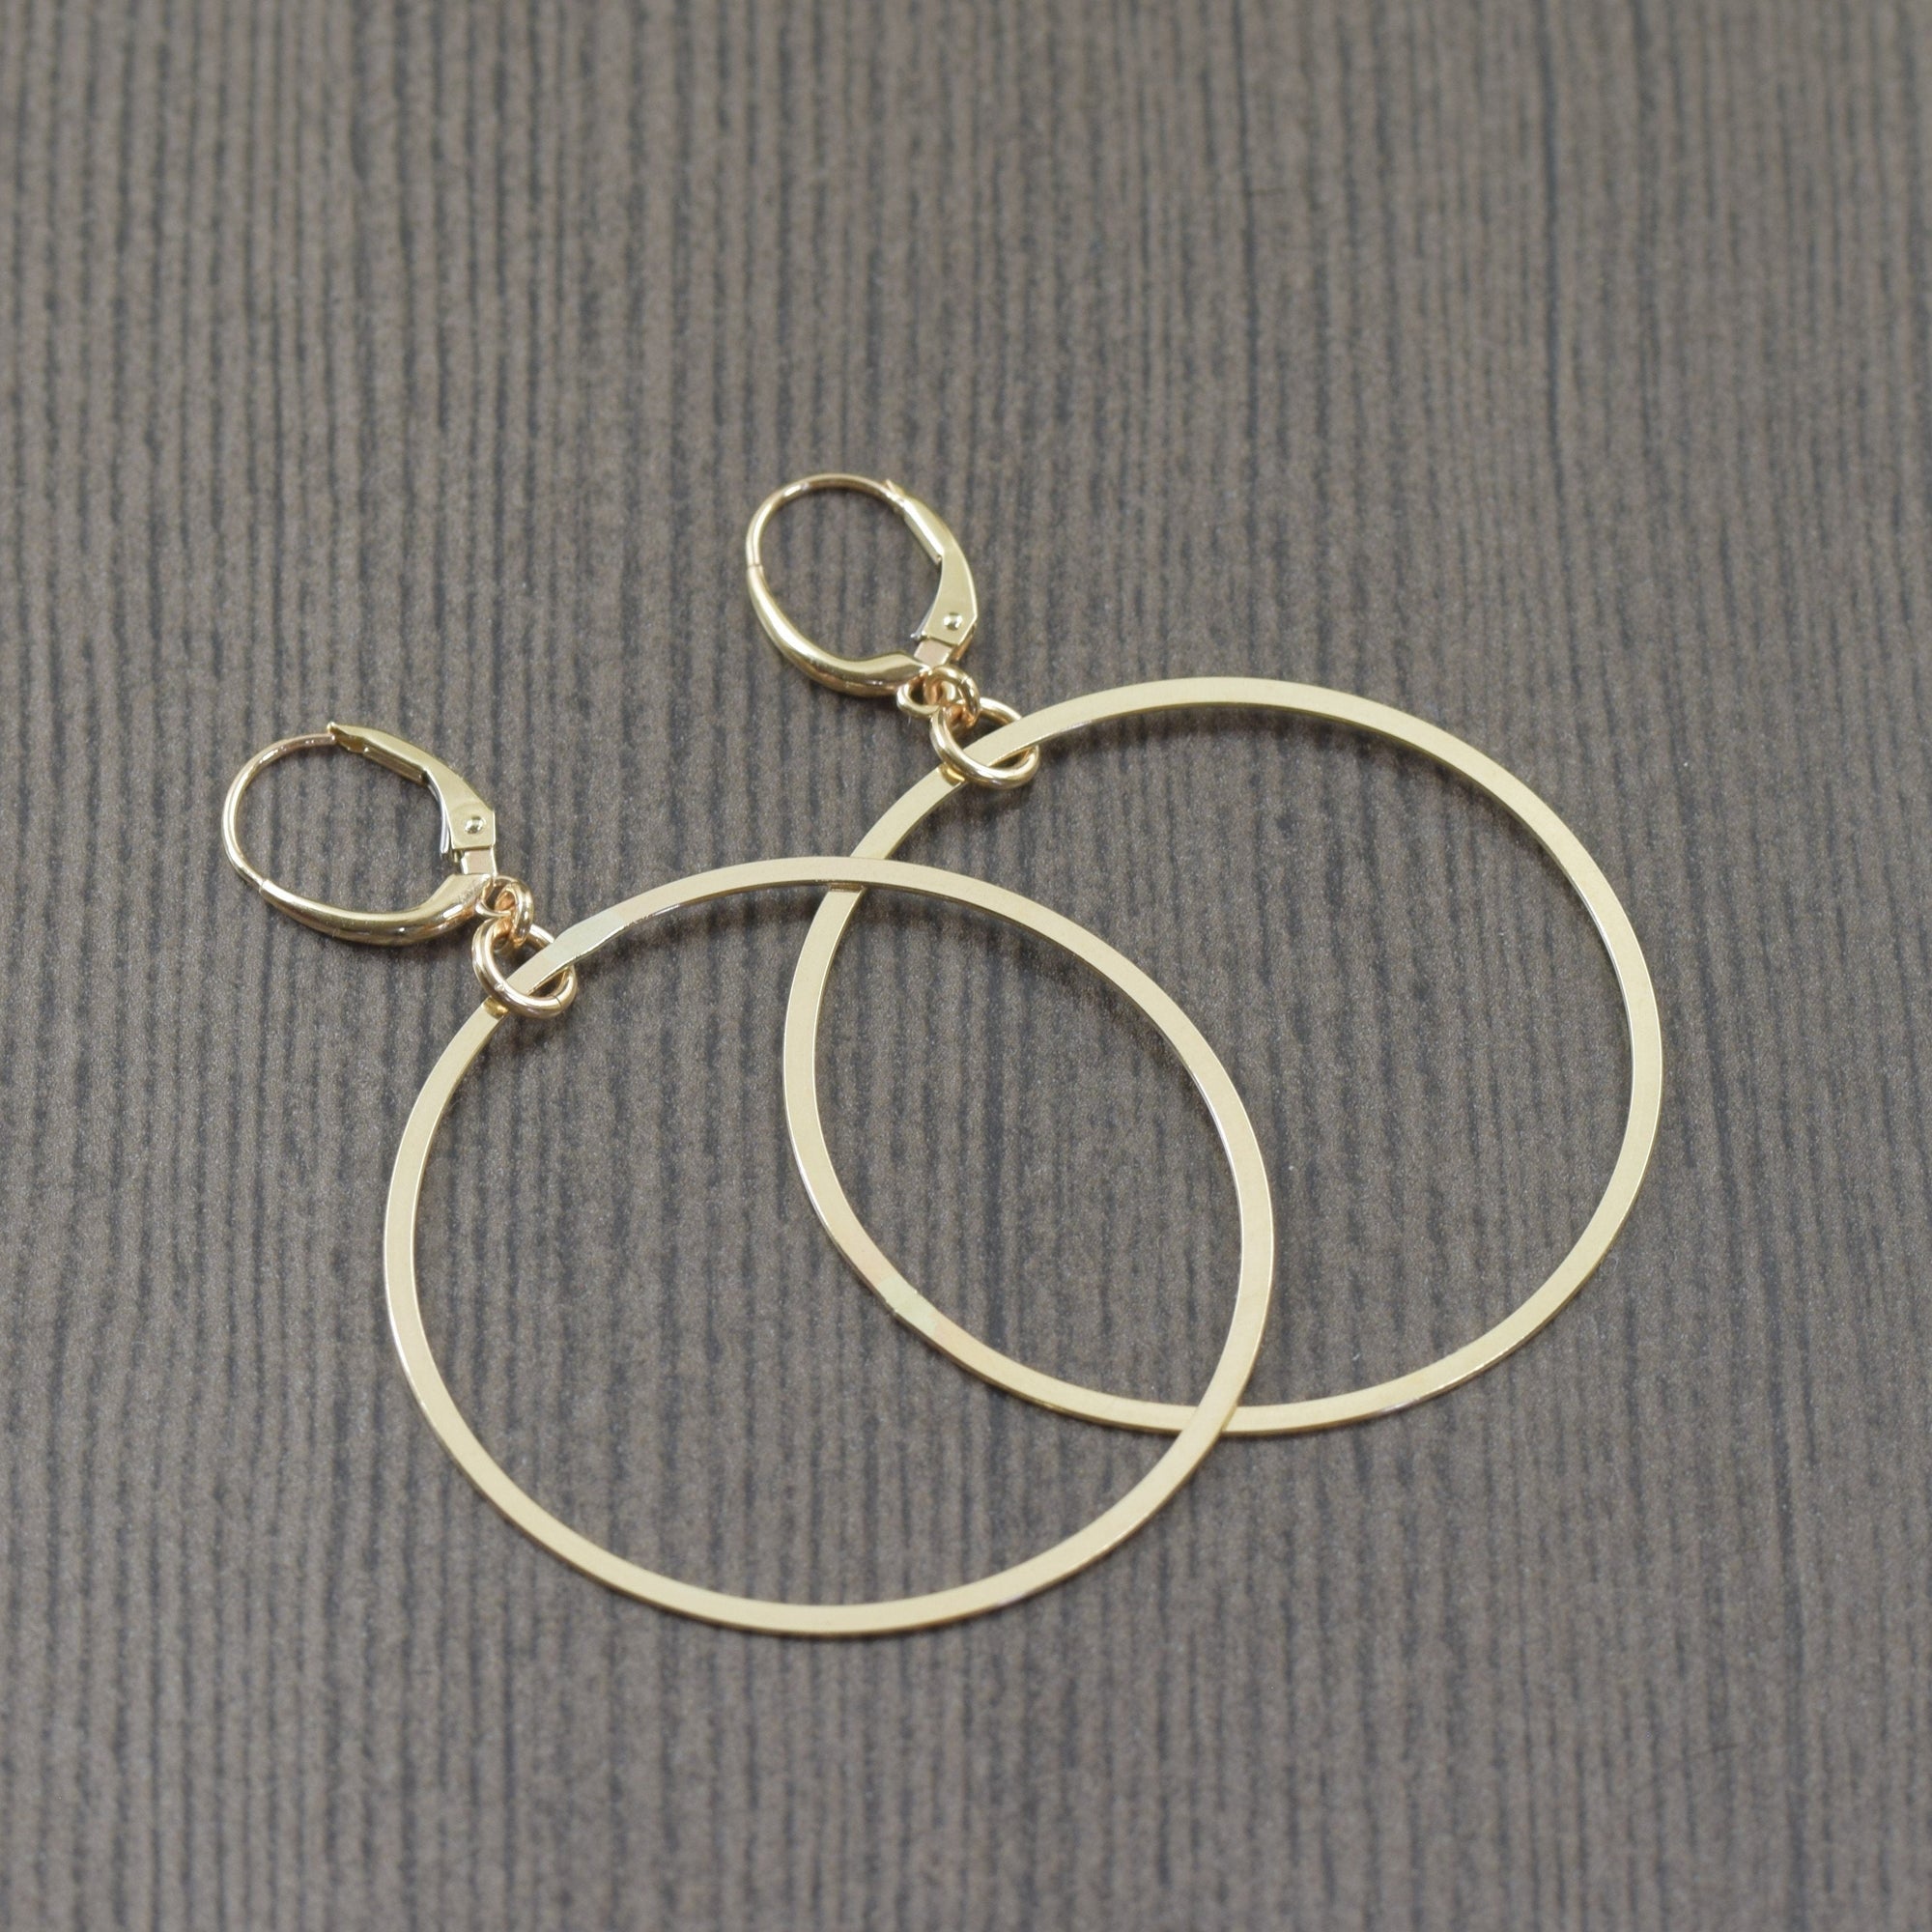 Large gold hoop earrings, Gold earwires with gold filled 2 inch hoop dangles